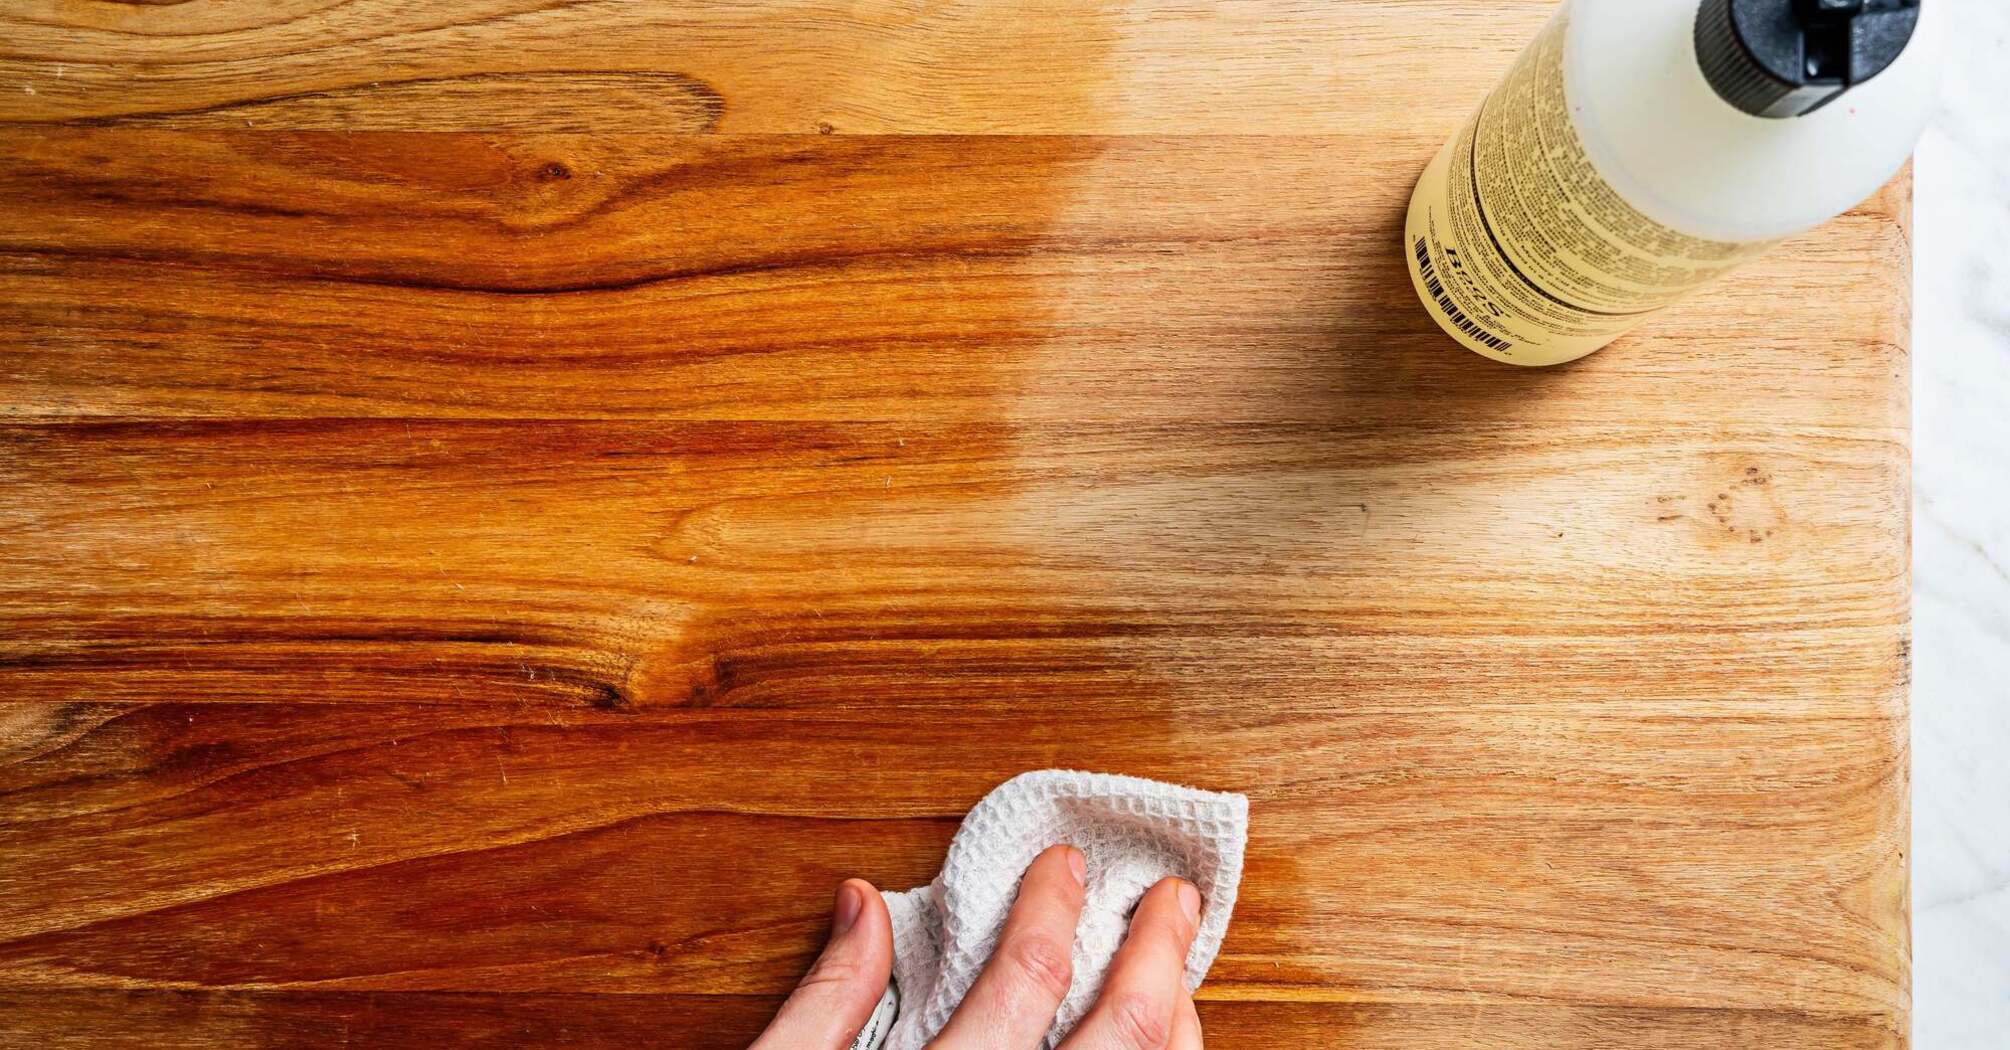 How to properly care for cutting boards